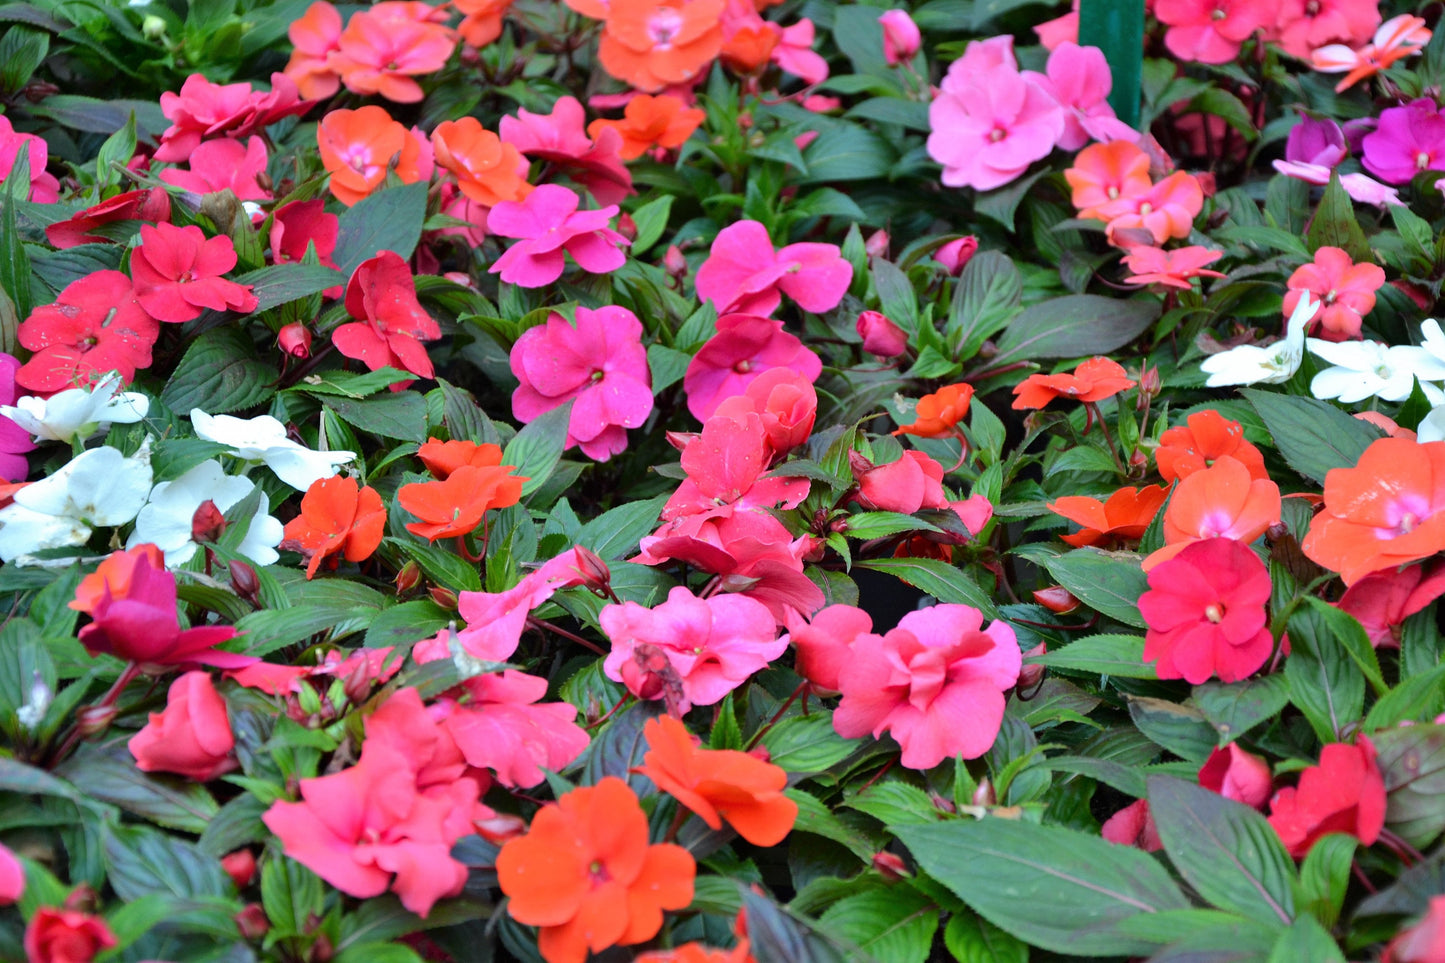 50 MIXED COLORS Dwarf IMPATIENS Walleriana Sun or Full Shade Red, White, Pink, Carmine, Scarlet, & Orange Flower Seeds